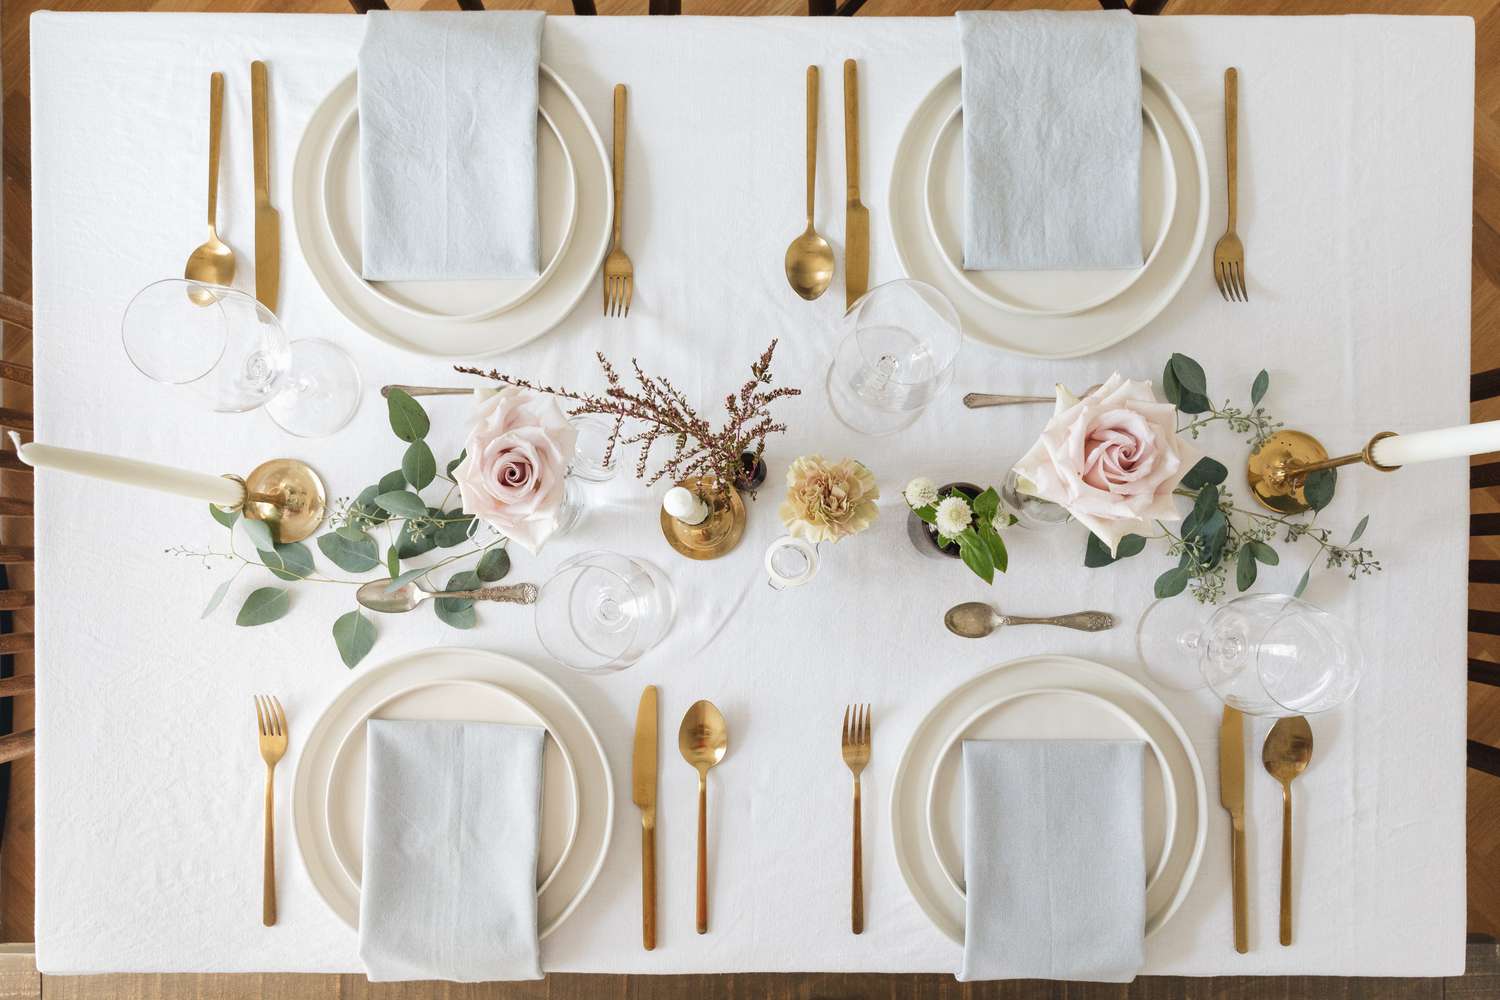 How Many Flatware Place Settings Should I Register For